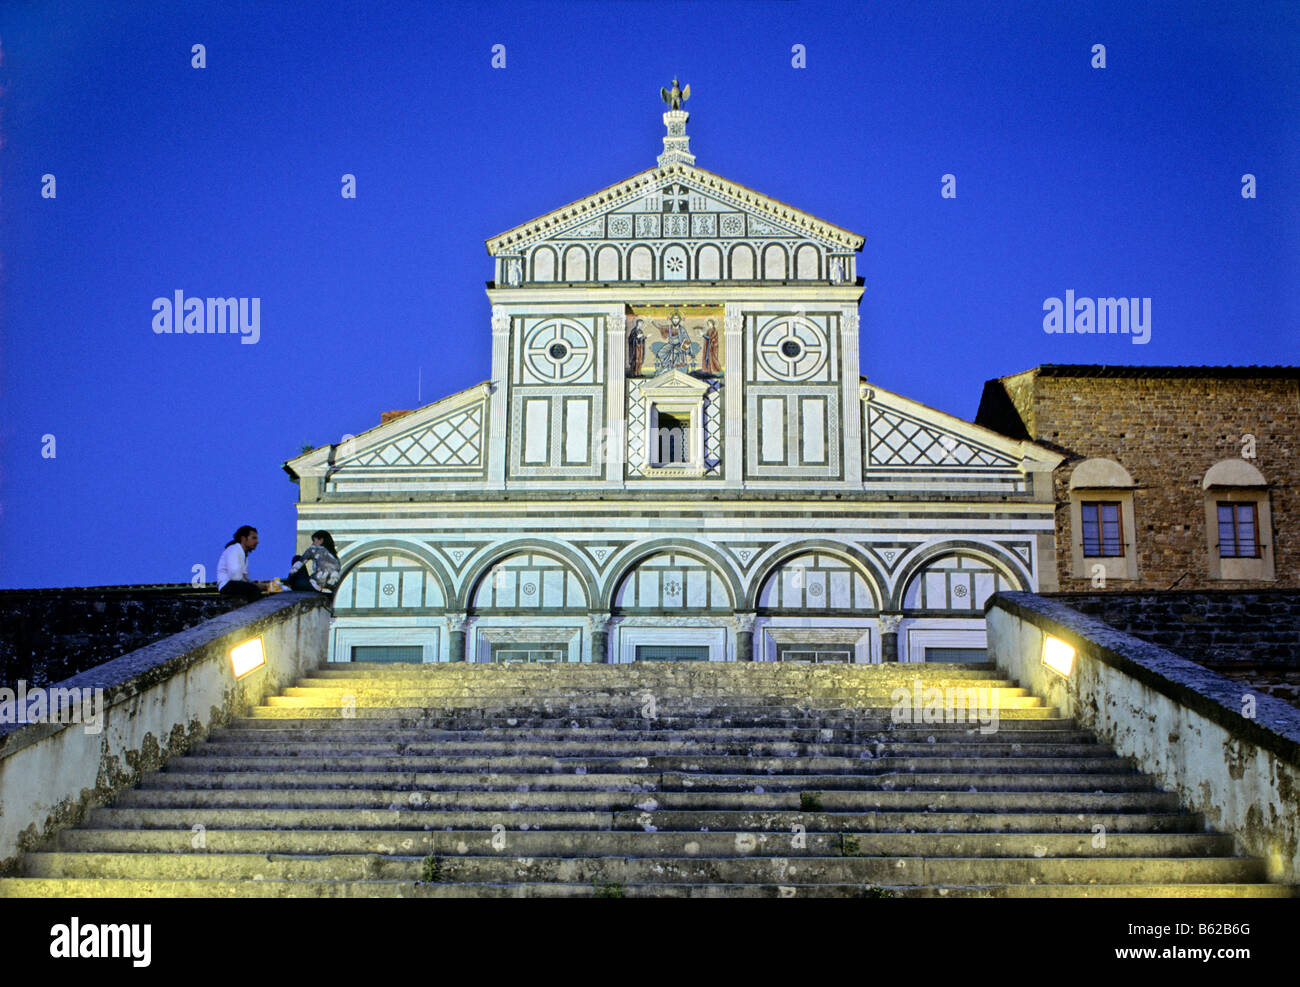 Staircase in front of the San Miniato al Monte Basilica, Florence, Firenze, Tuscany, Italy, Europe Stock Photo